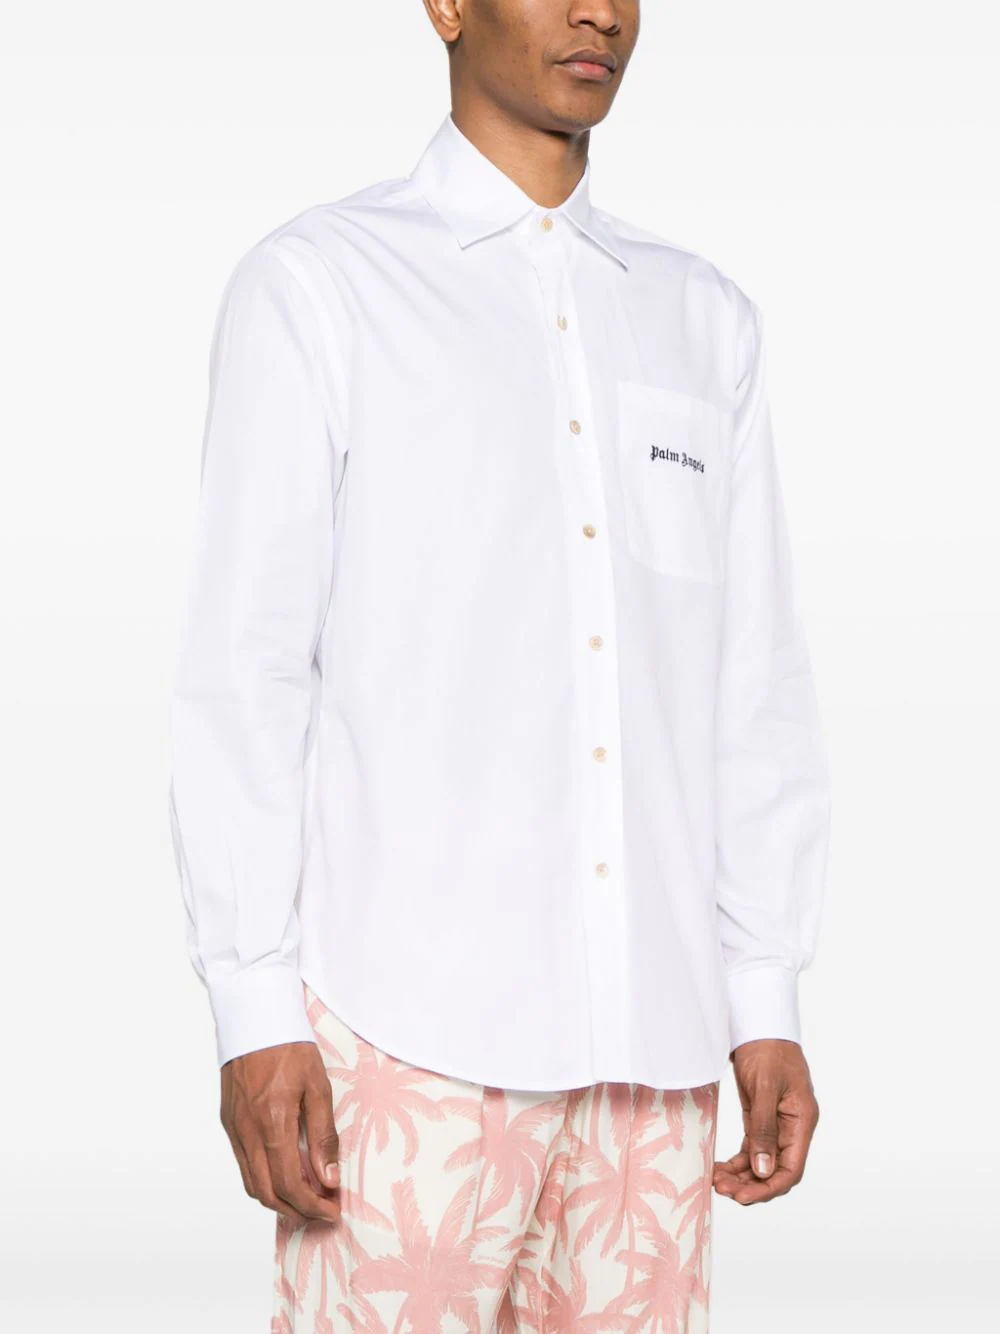 Shop Palm Angels Logo Embroidered Cotton Shirt White